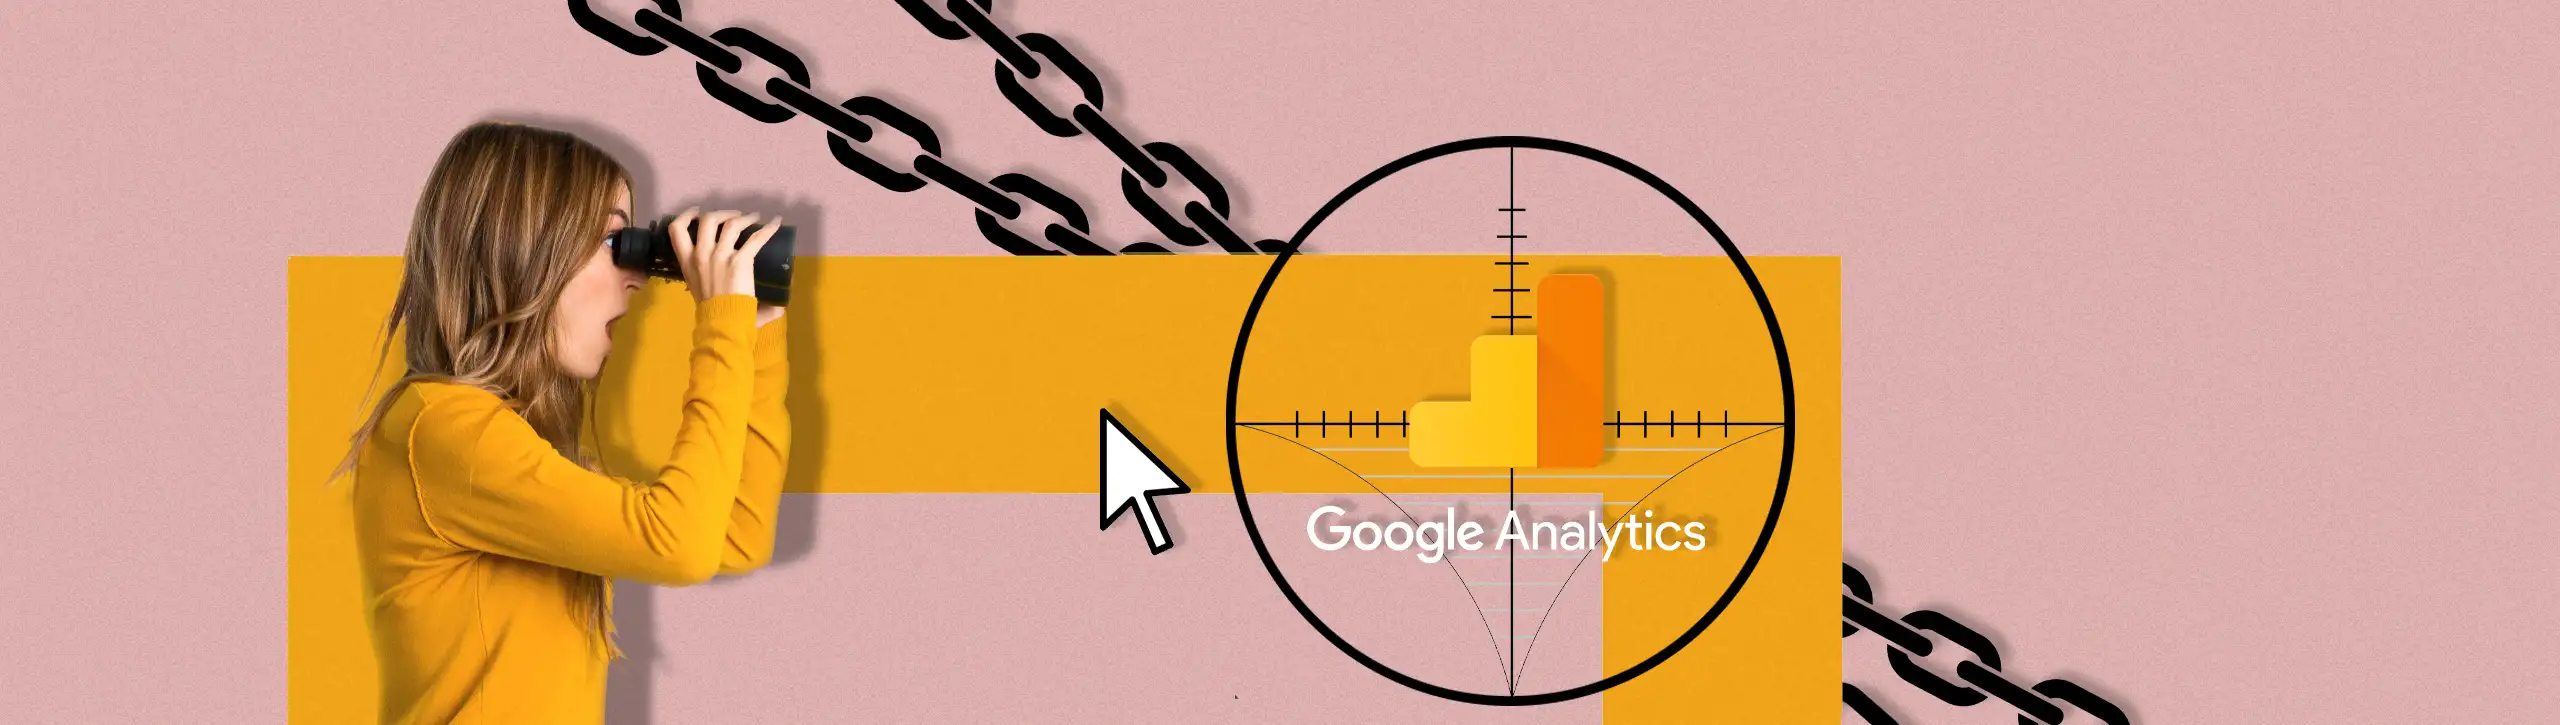 How to Track Link Clicks in Google Analytics